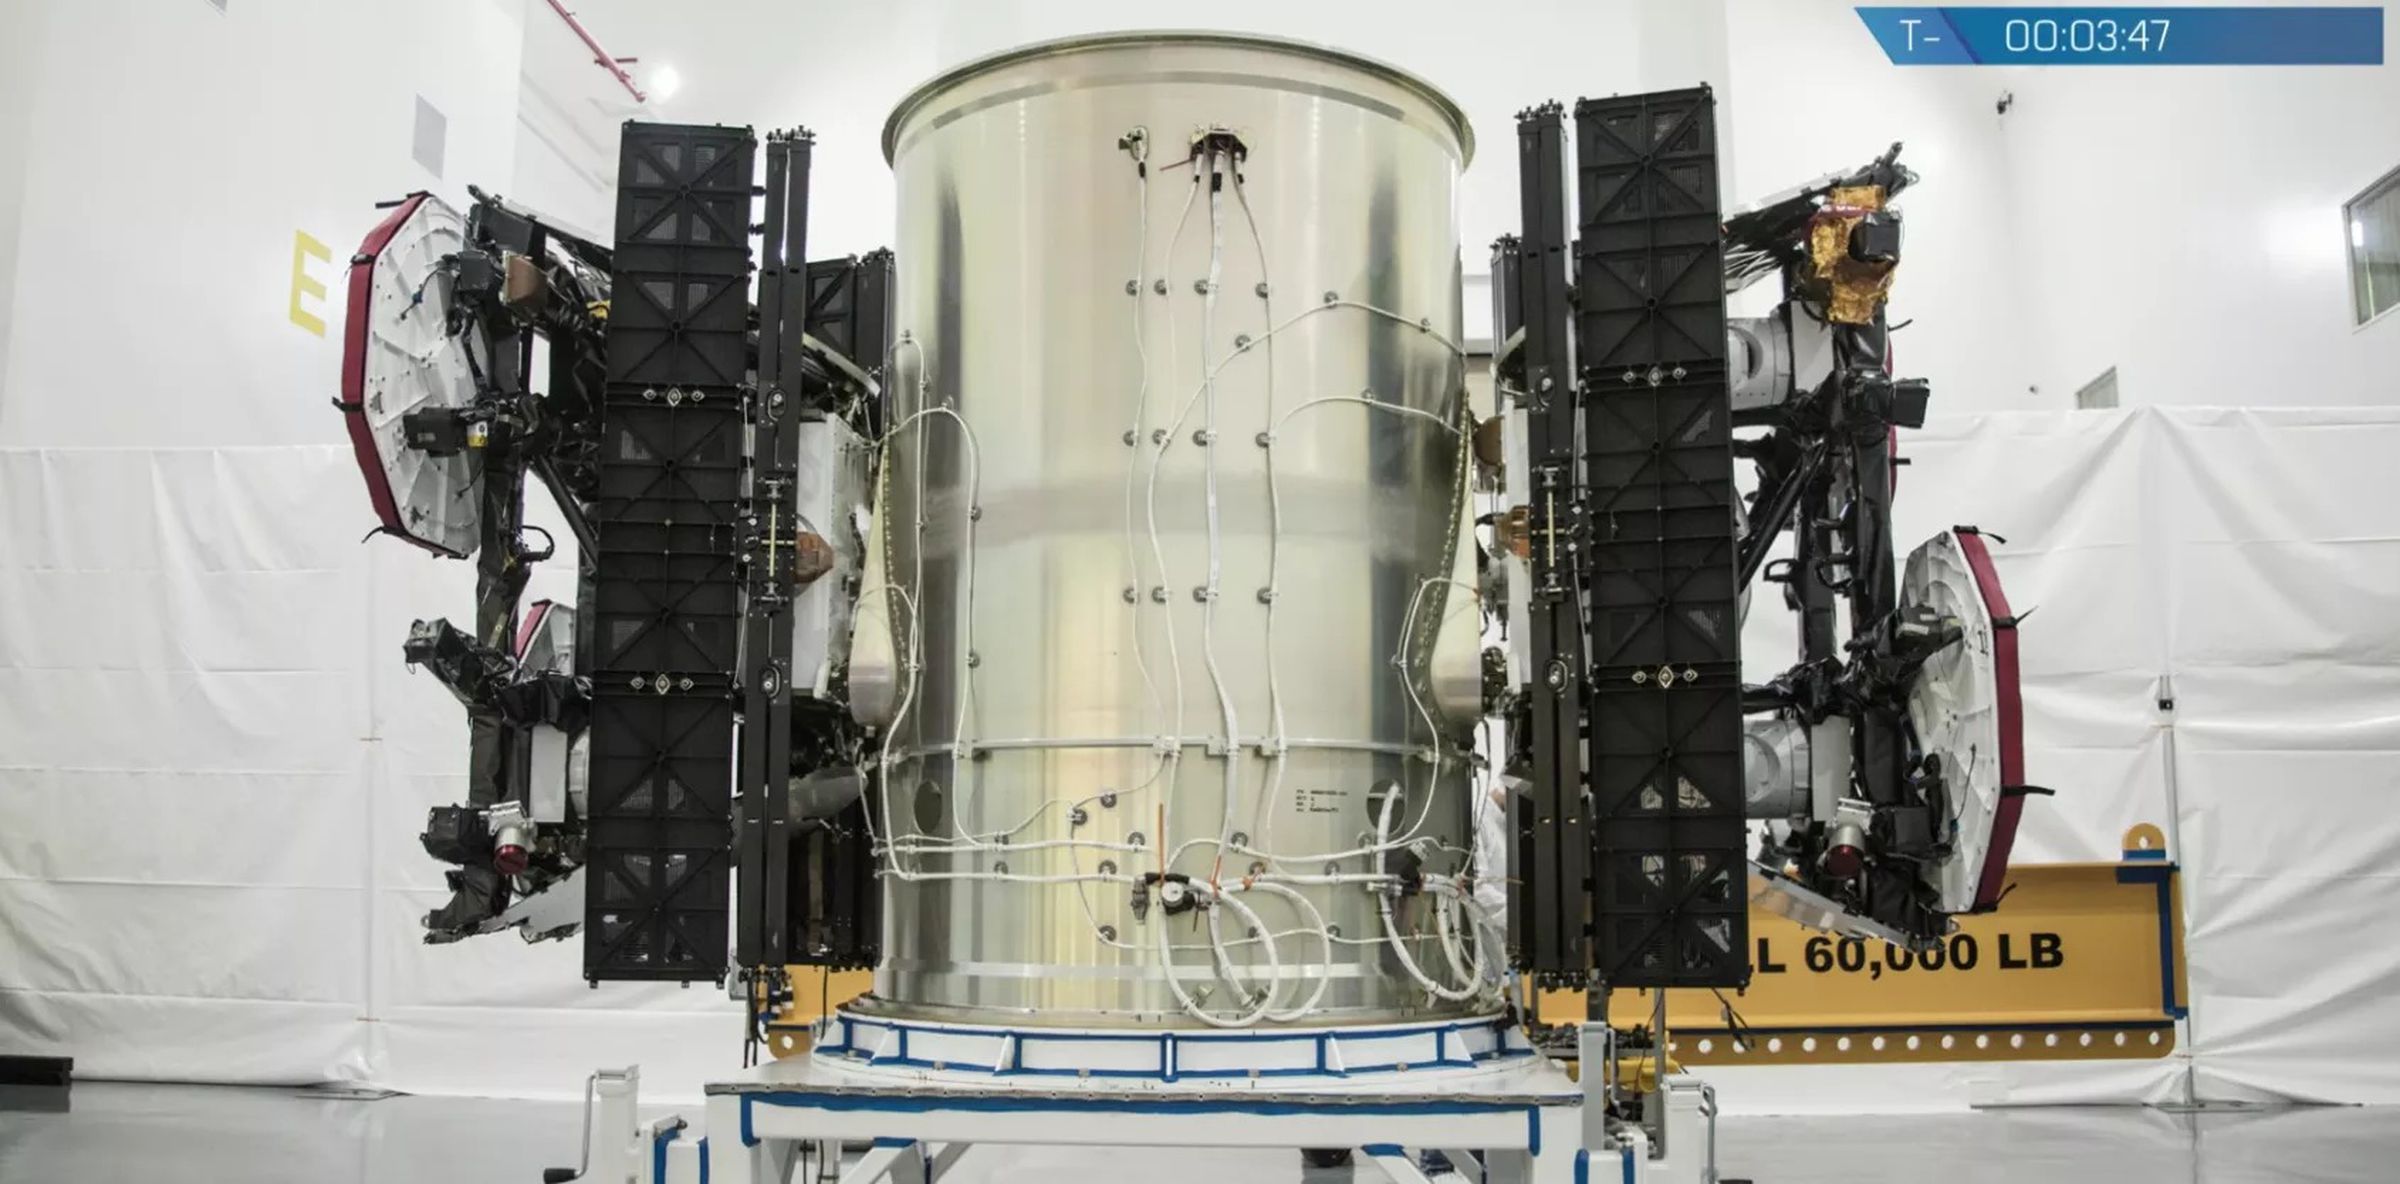 One of SpaceX’s test satellites for Starlink, which was launched in February.